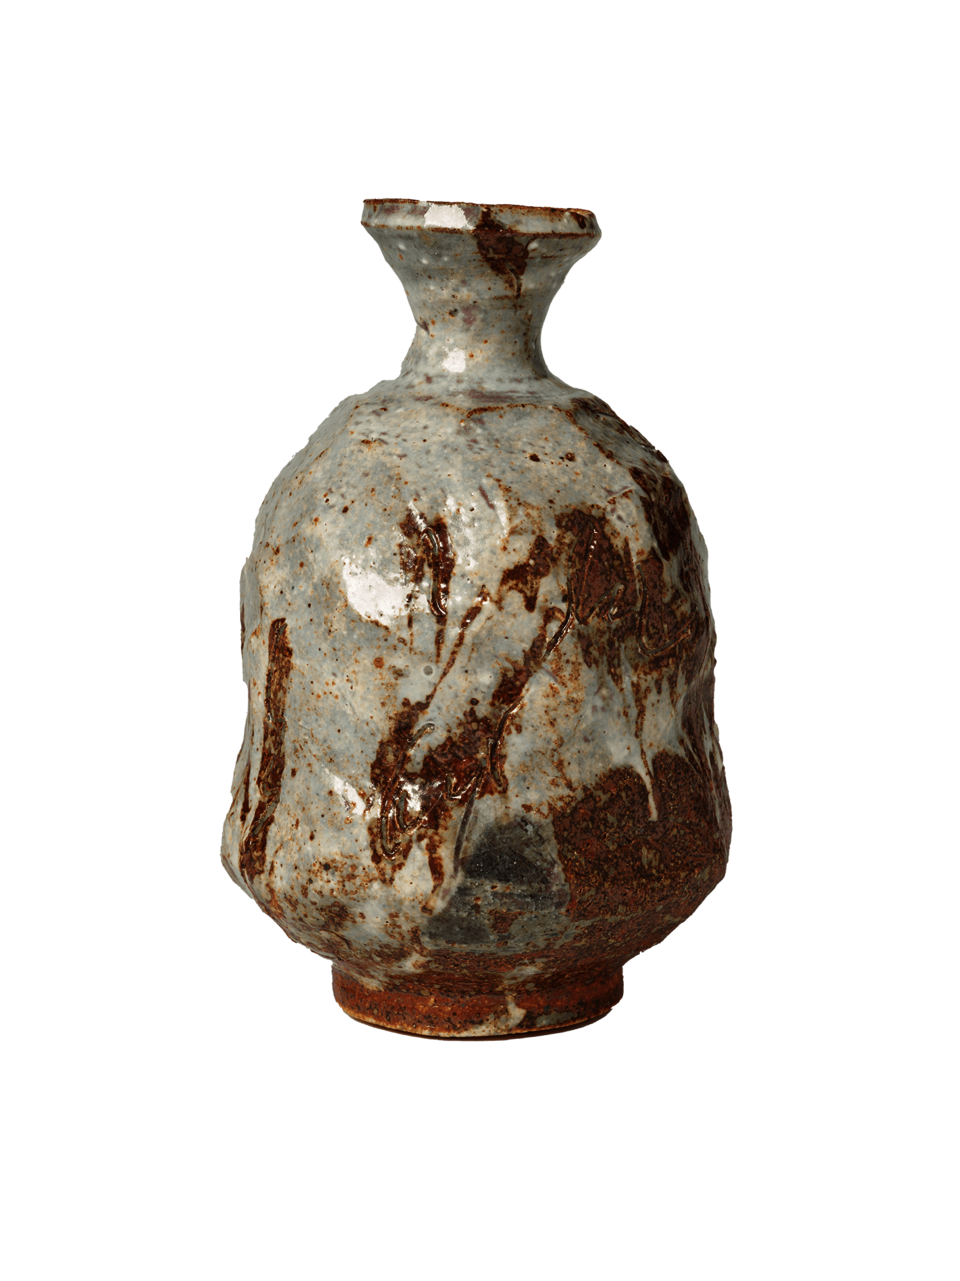 Vase with a small neck and rounded foot. Covered in drips of grey and brown.